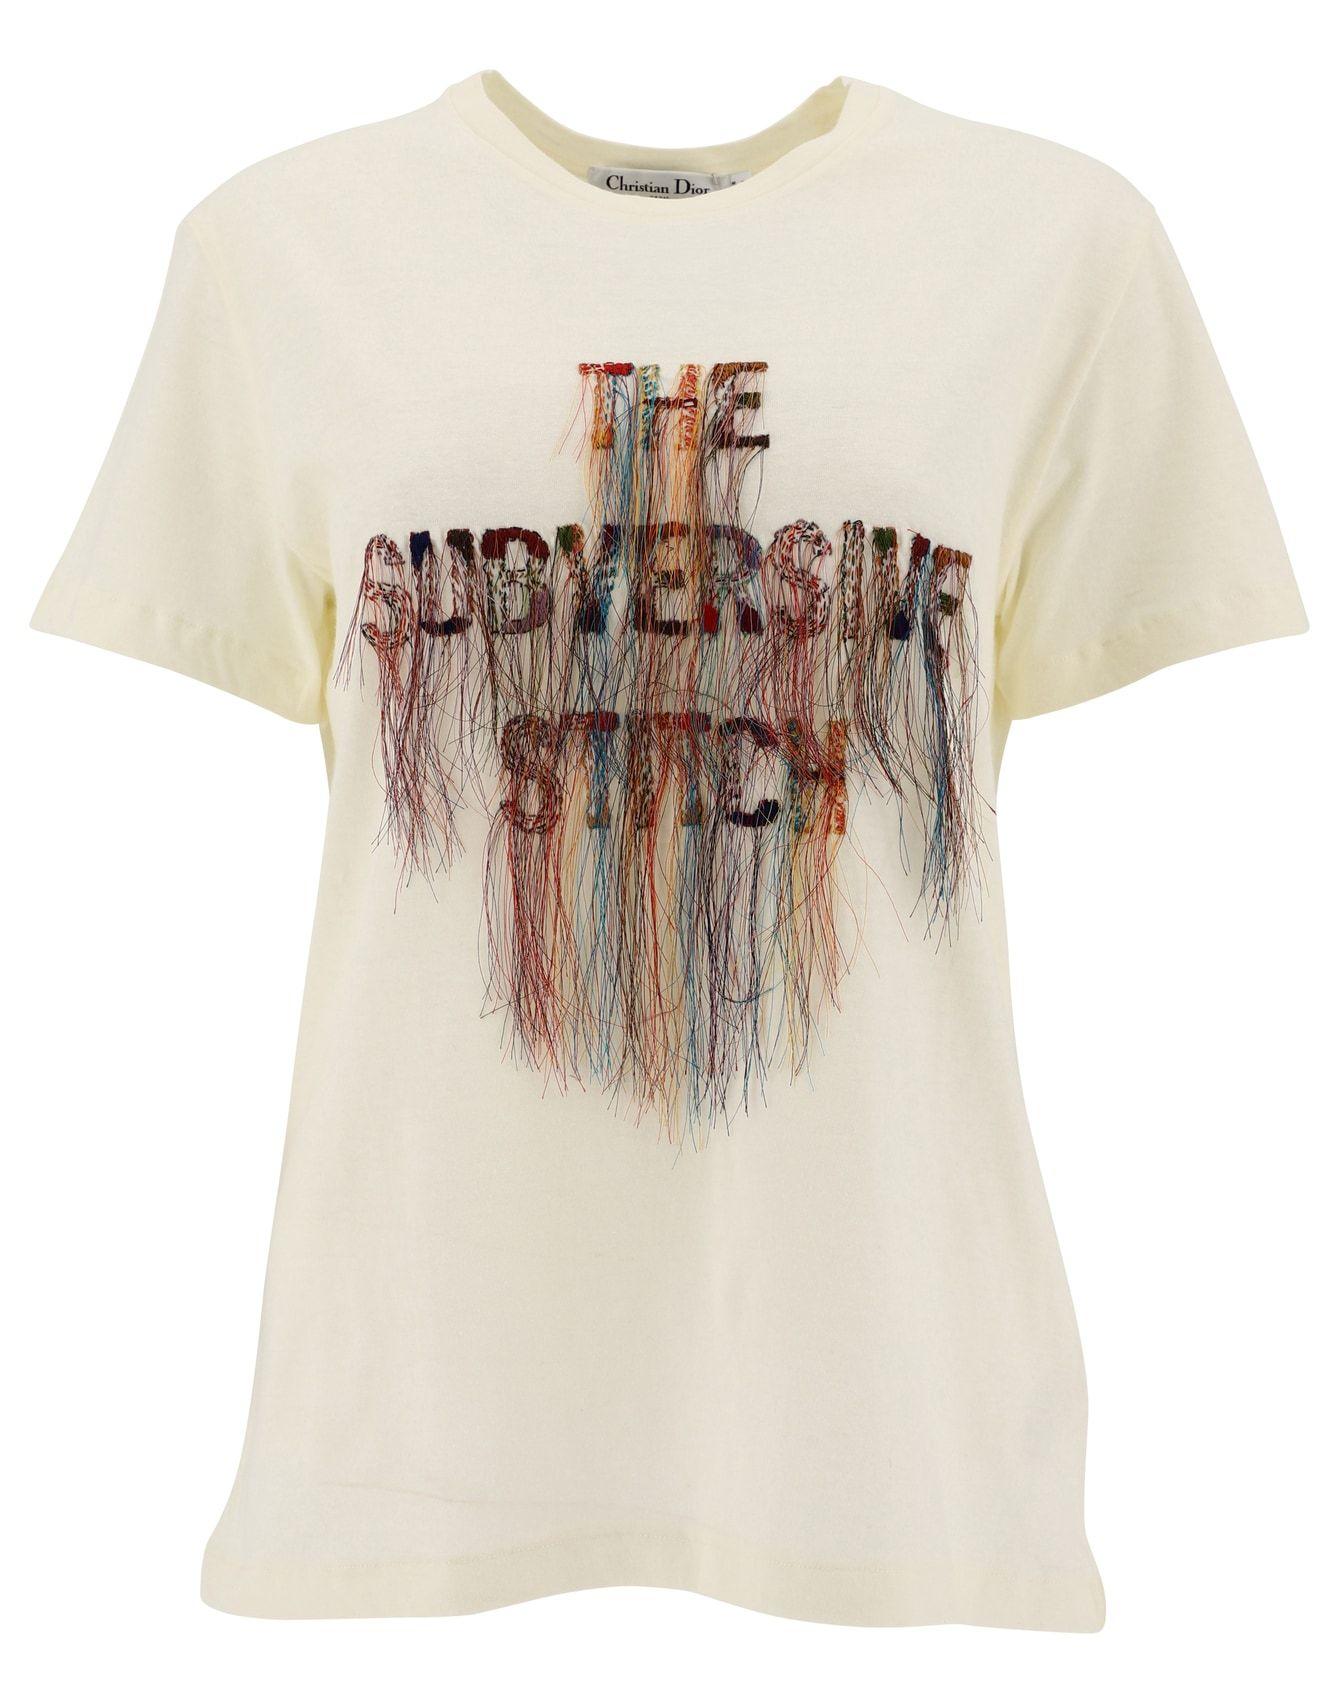 Dior The Subversive Stitch Embroidered T-shirt in White | Lyst